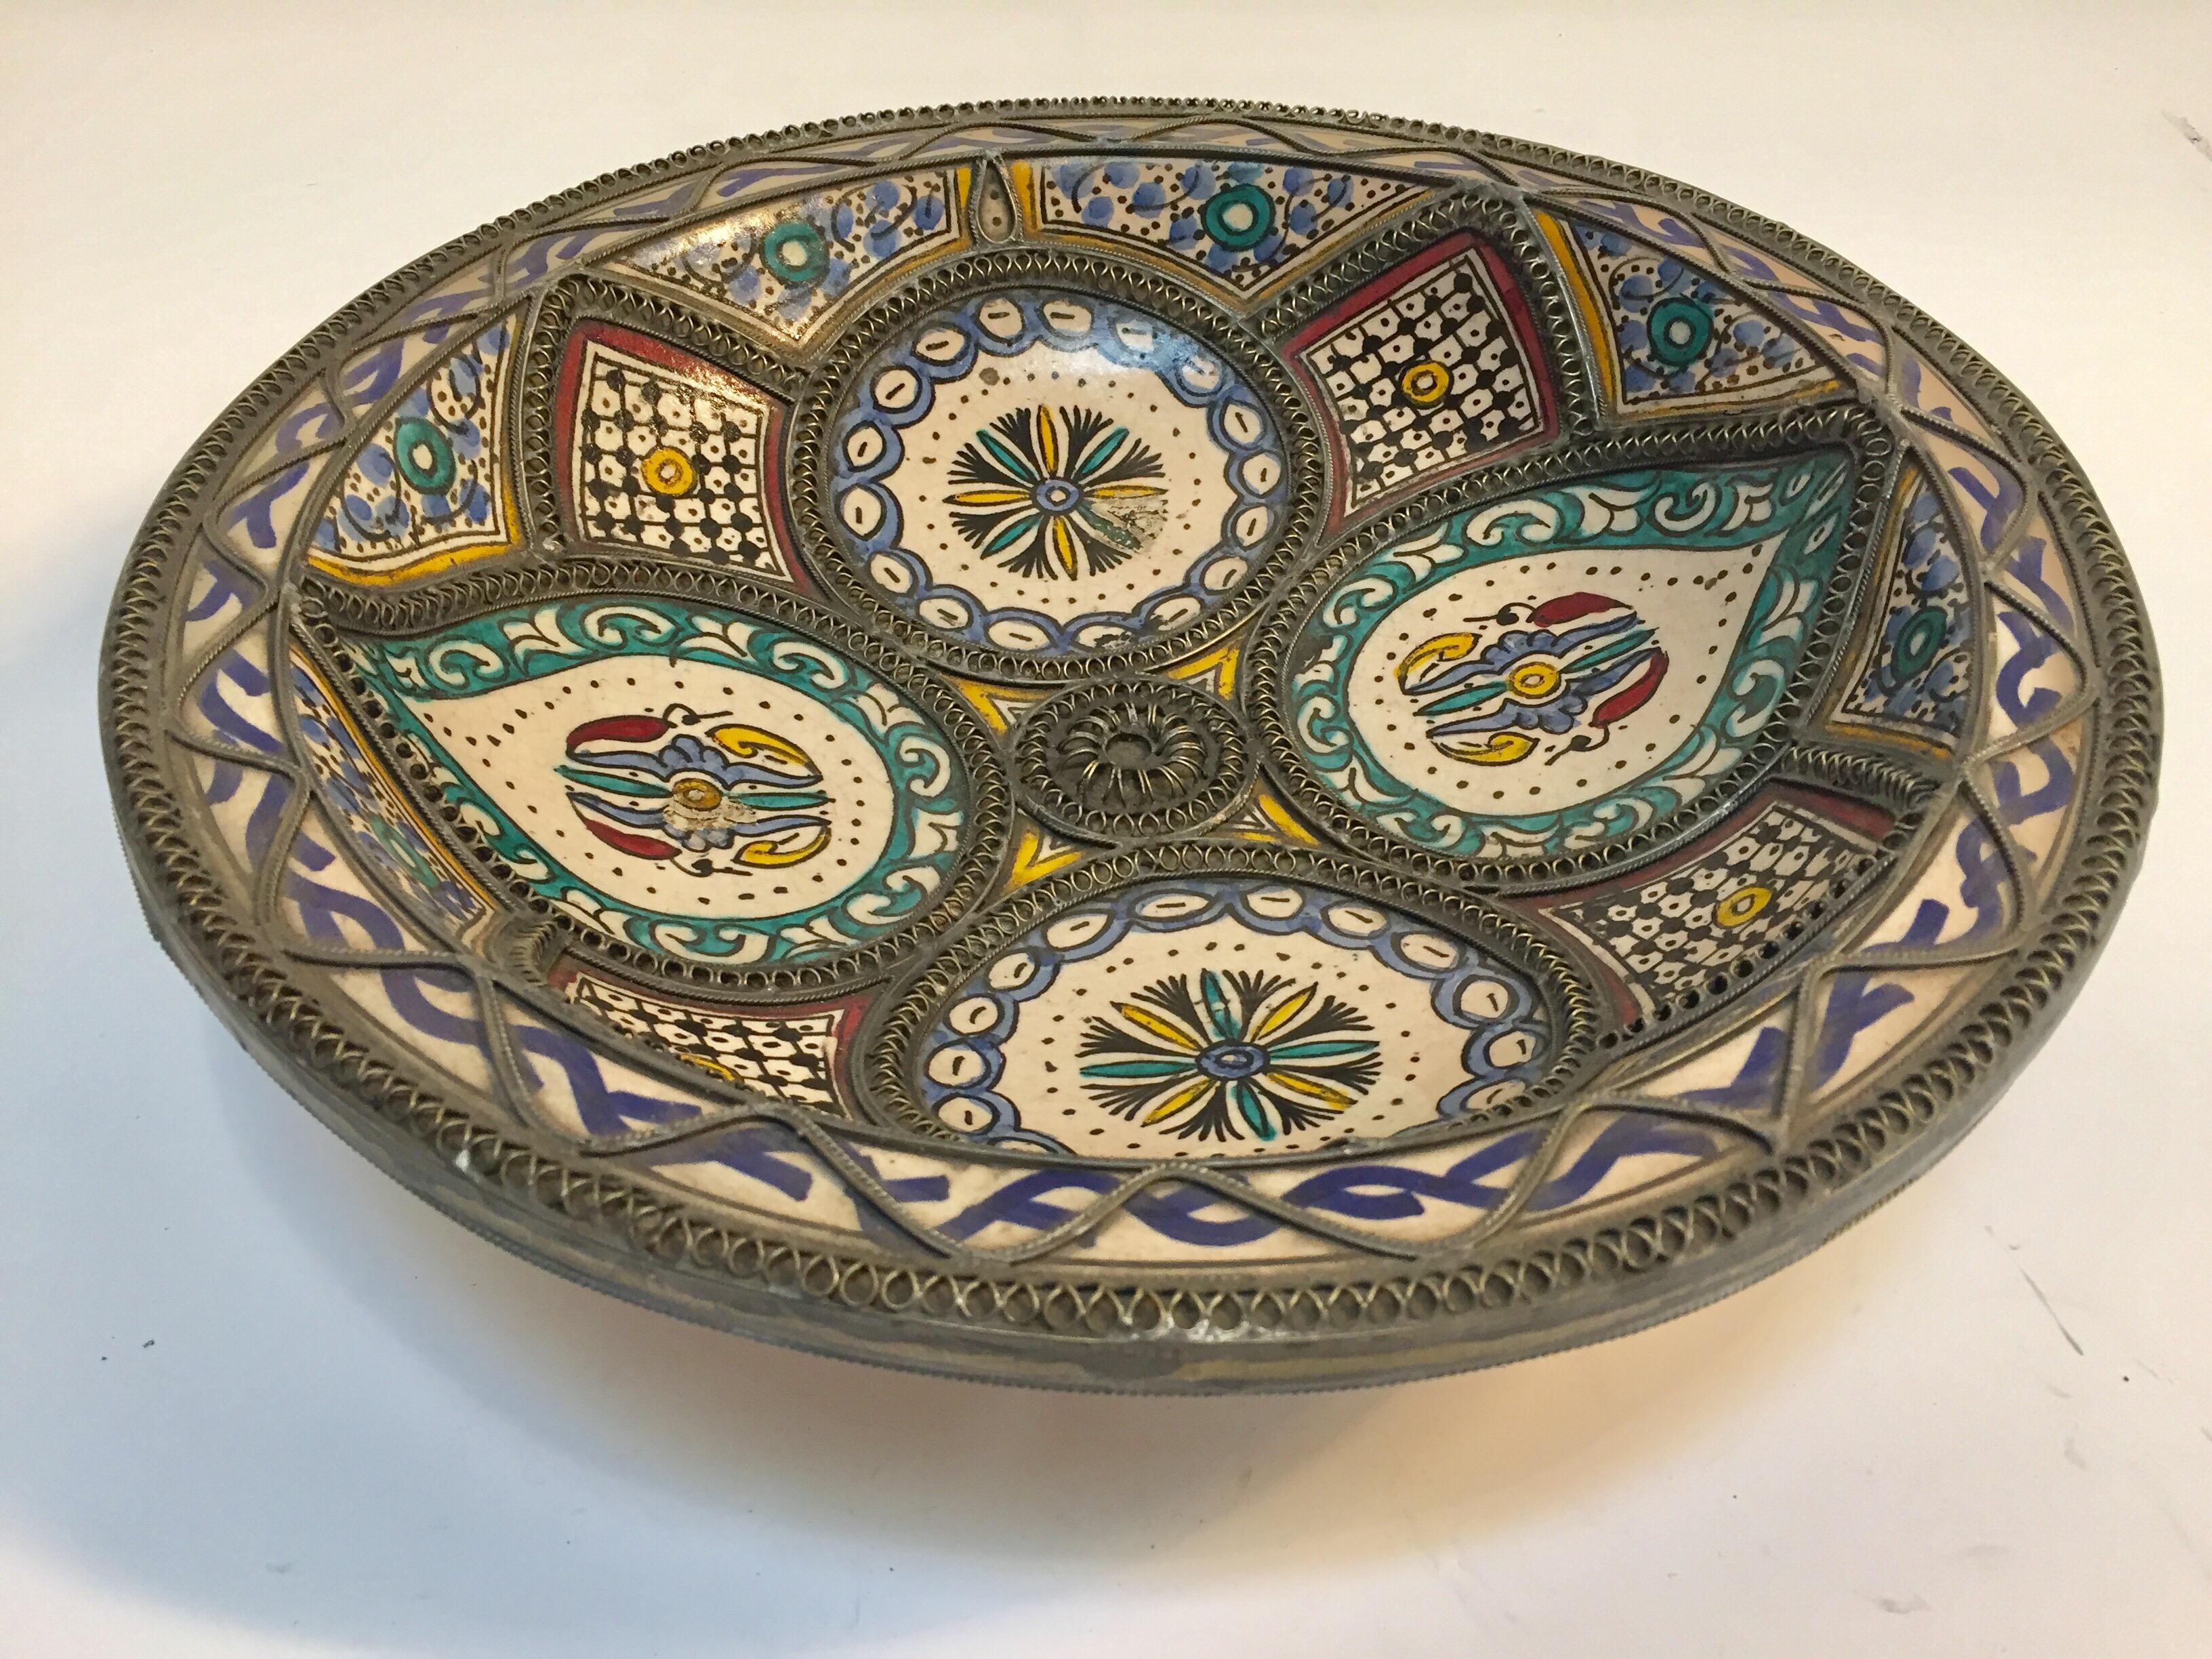 Handcrafted large Moroccan polychrome decorative ceramic plate from Fez. Bleu de Fez, very nice designs hand painted by artist in Fez.
Antique ceramic handcrafted bowl with geometrical and floral designs in blue and white and polychrome adorned